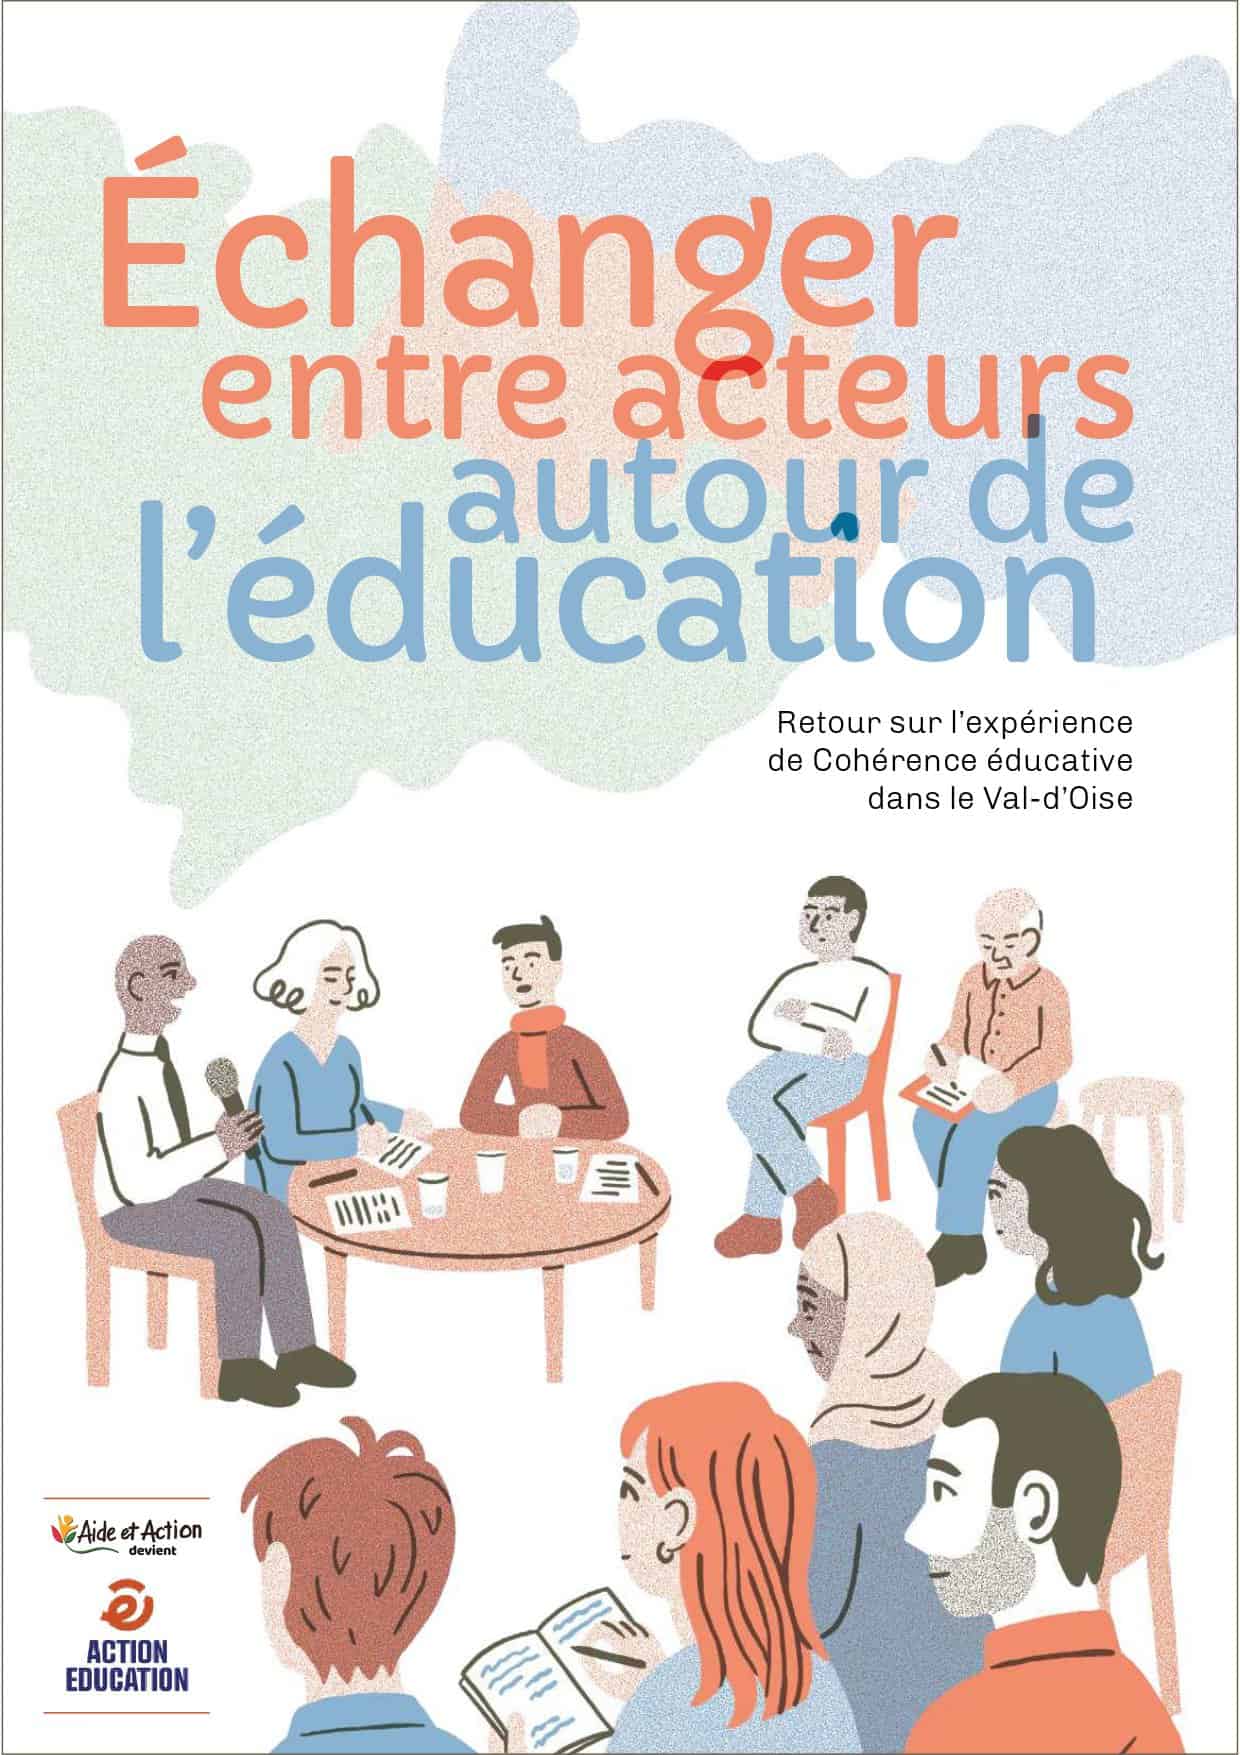 Cover of the new booklet of the educational coherence on its 10 years of experiences in the Val d'Oise